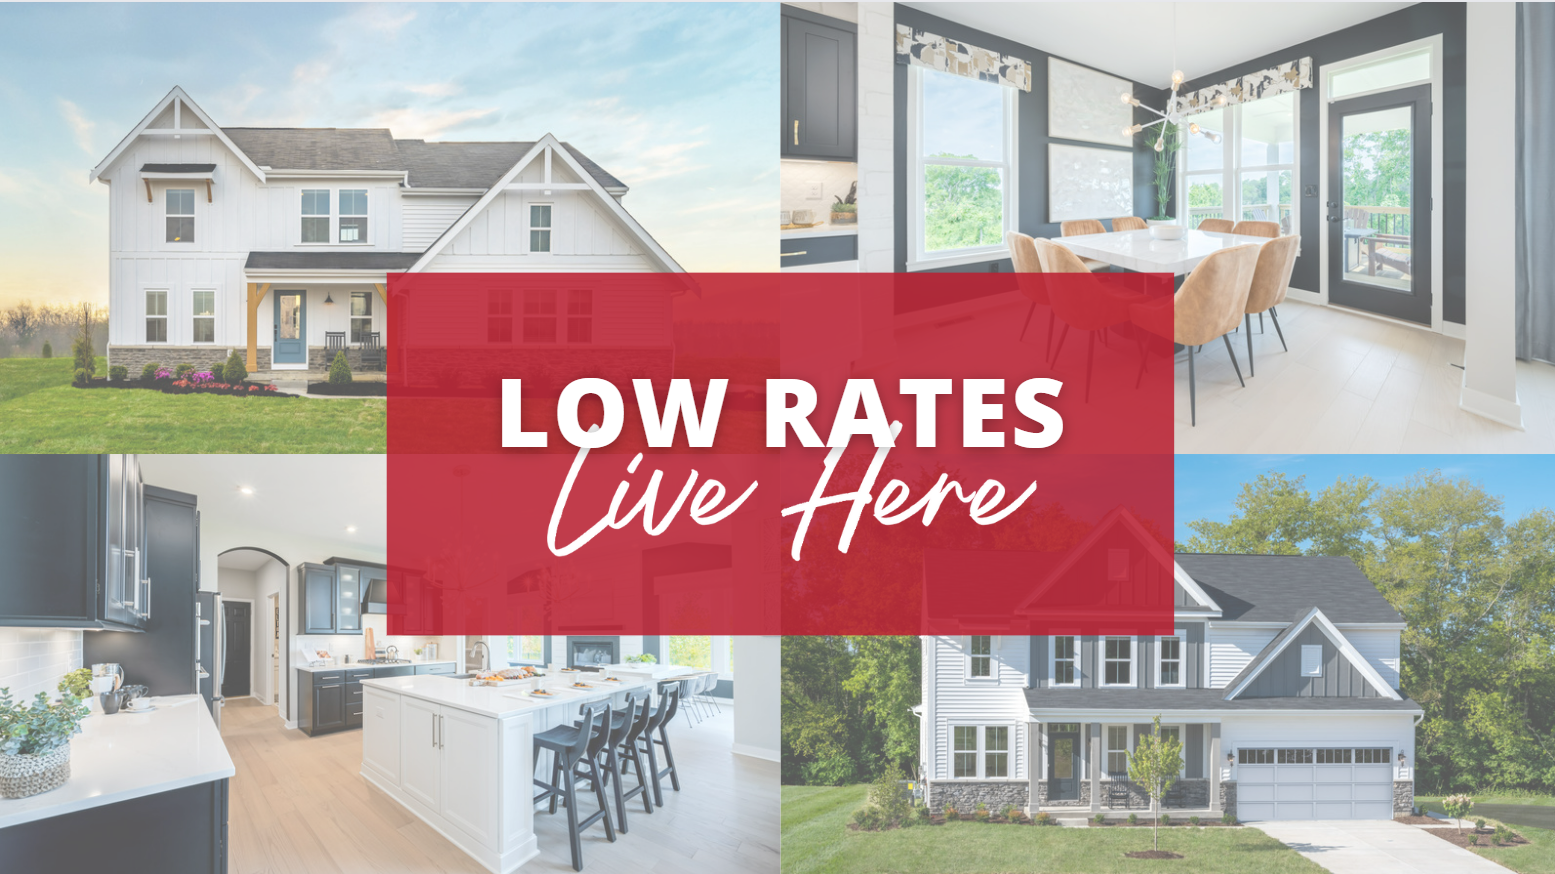 Low Rates Live Here | Learn More On The Advantages of What This Low Rate Can Do For You